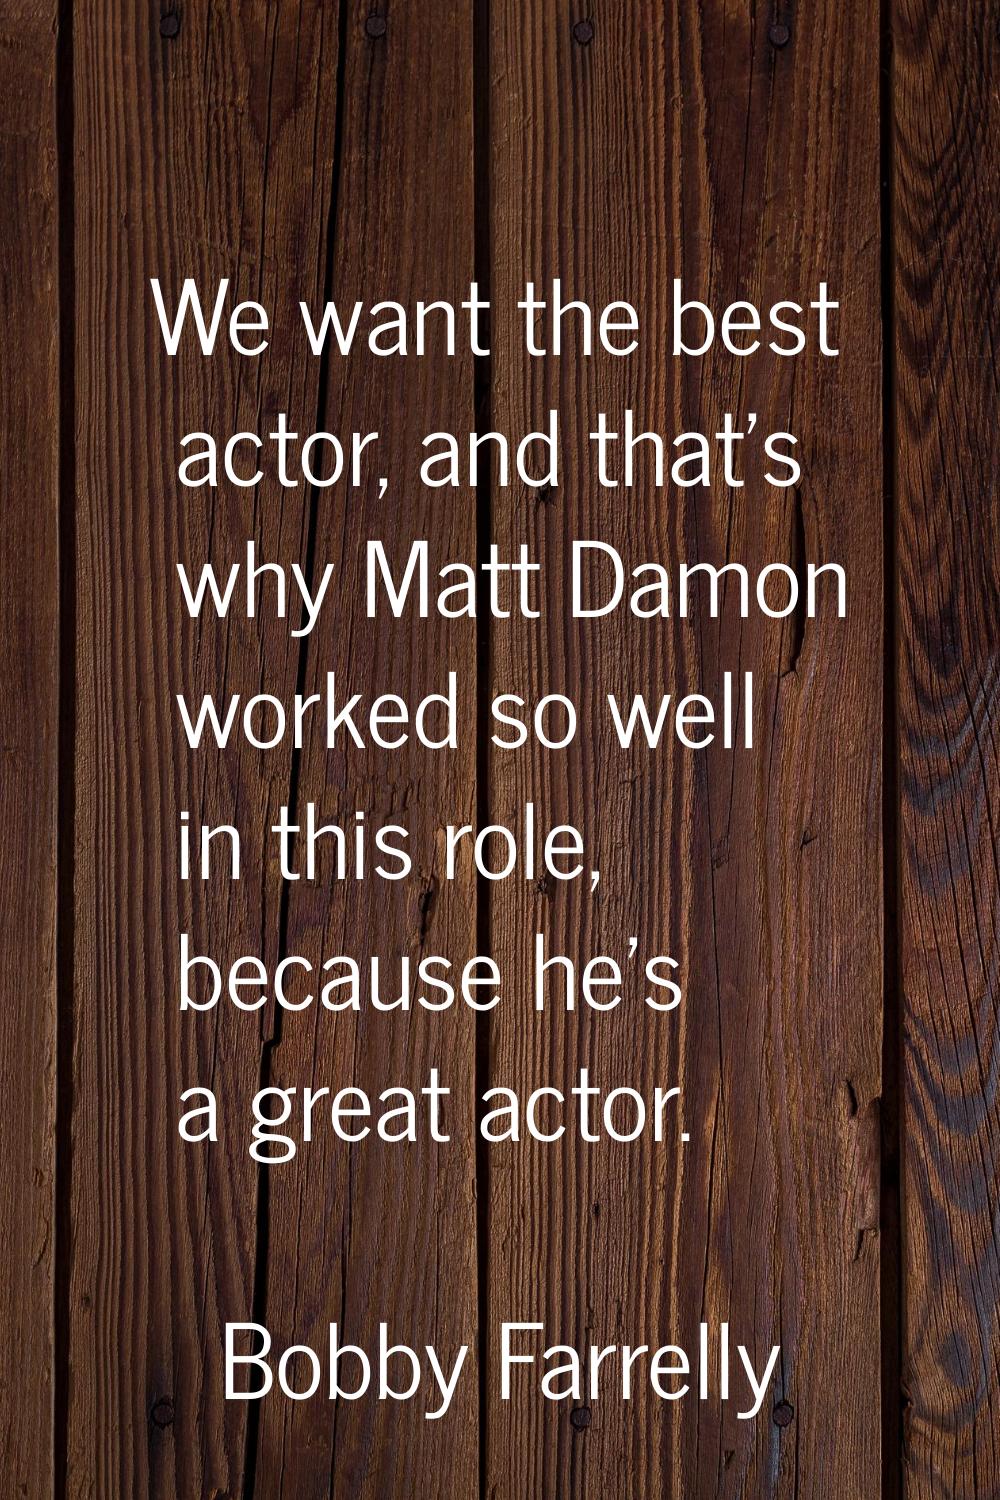 We want the best actor, and that's why Matt Damon worked so well in this role, because he's a great